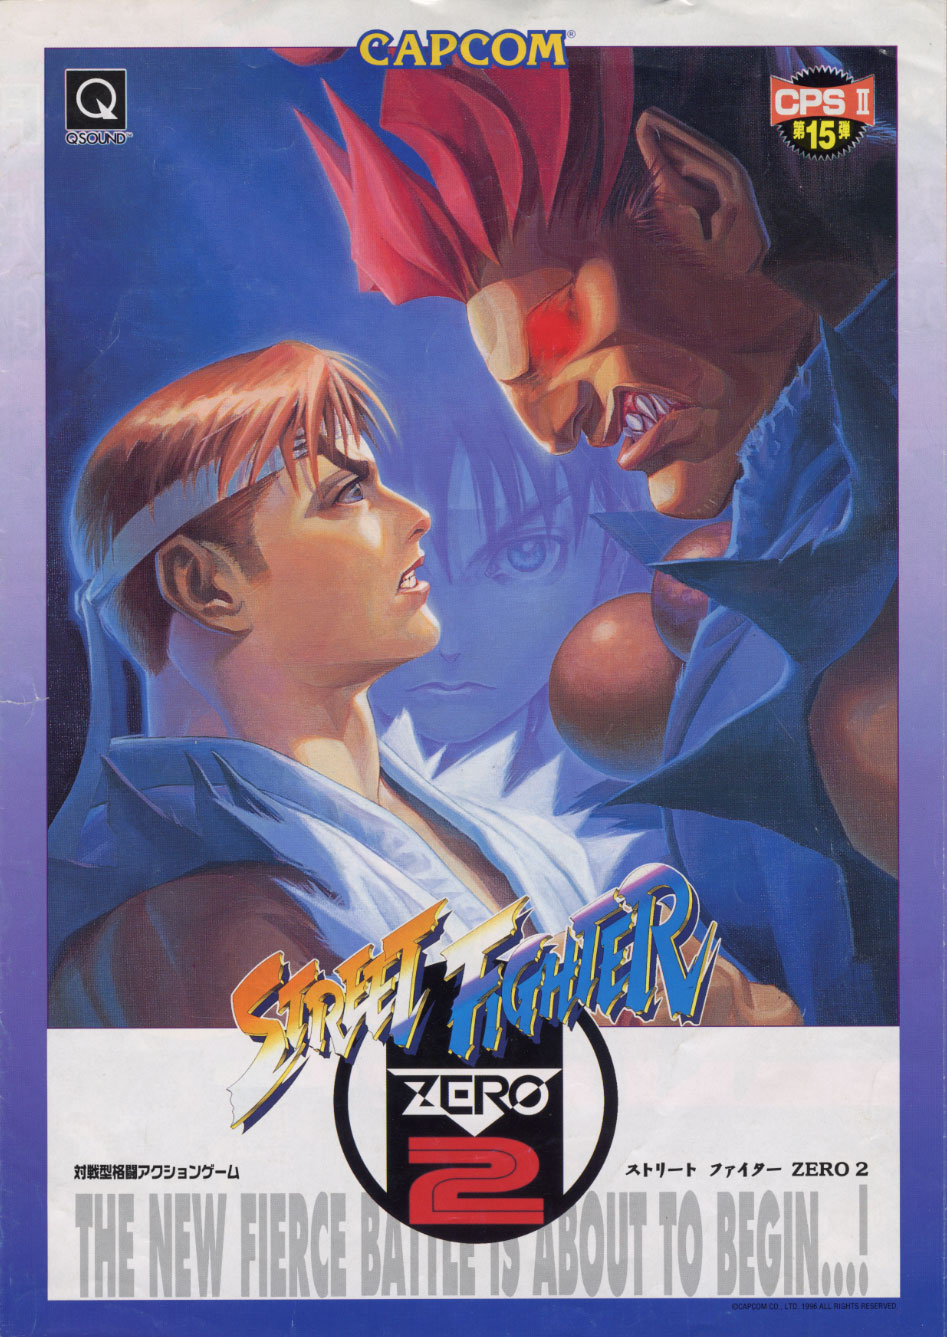 One of many iconic Street Fighter arcade art pieces